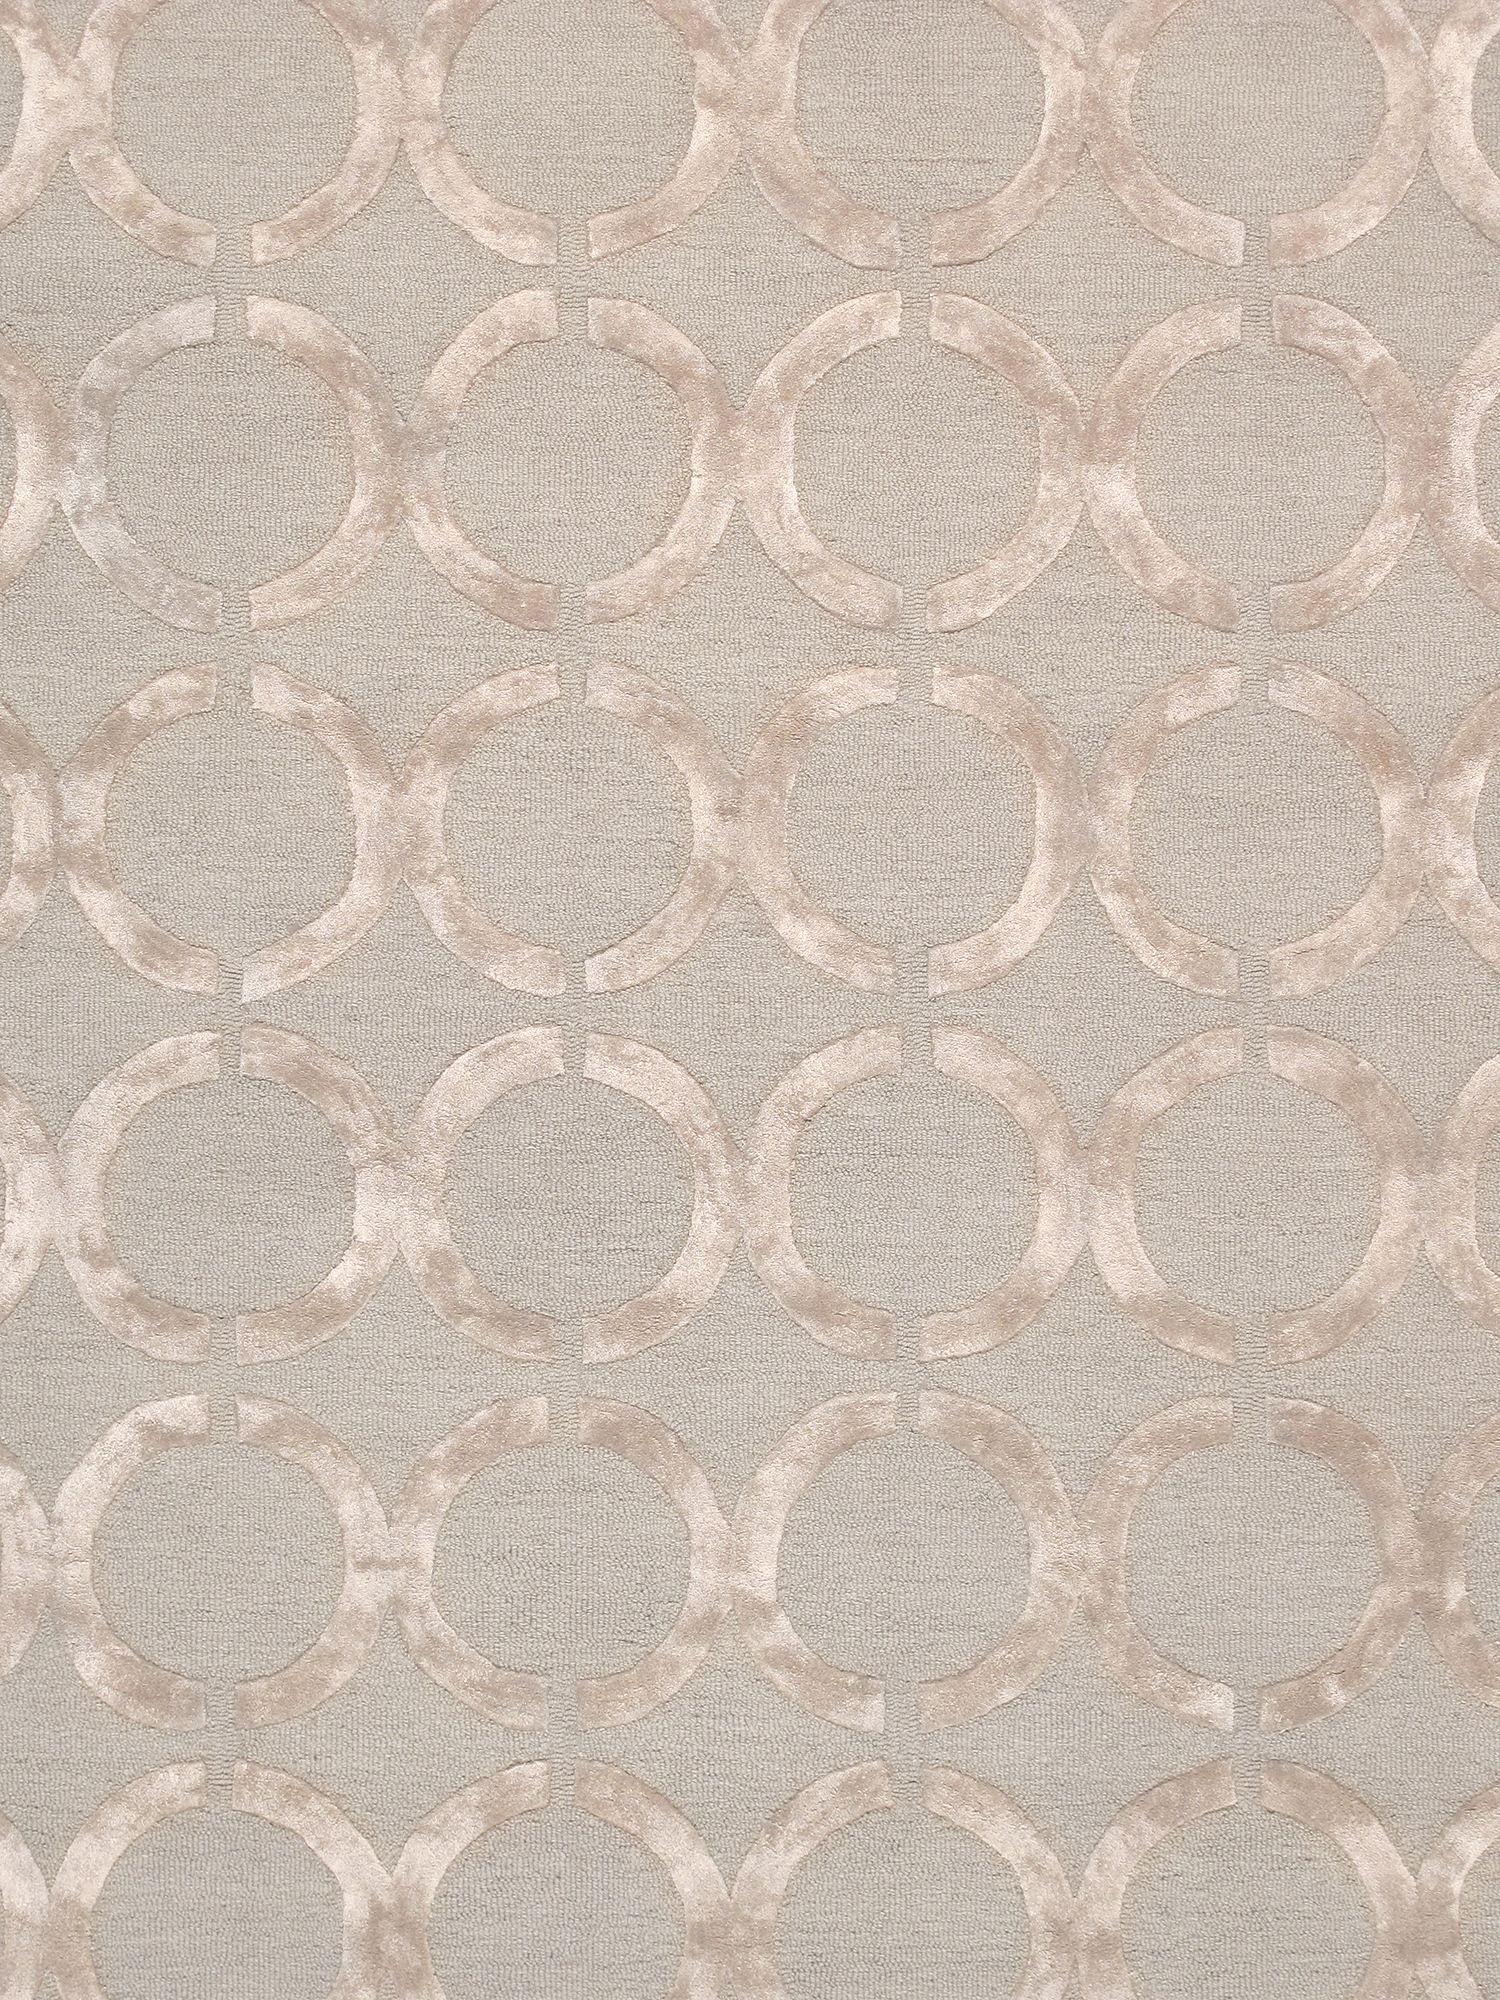 Pasargad Home Edgy Collection Hand-Tufted Bamboo Silk & Wool Area Rug- 7' 9" X 9' 9" , Beige - image 2 of 6